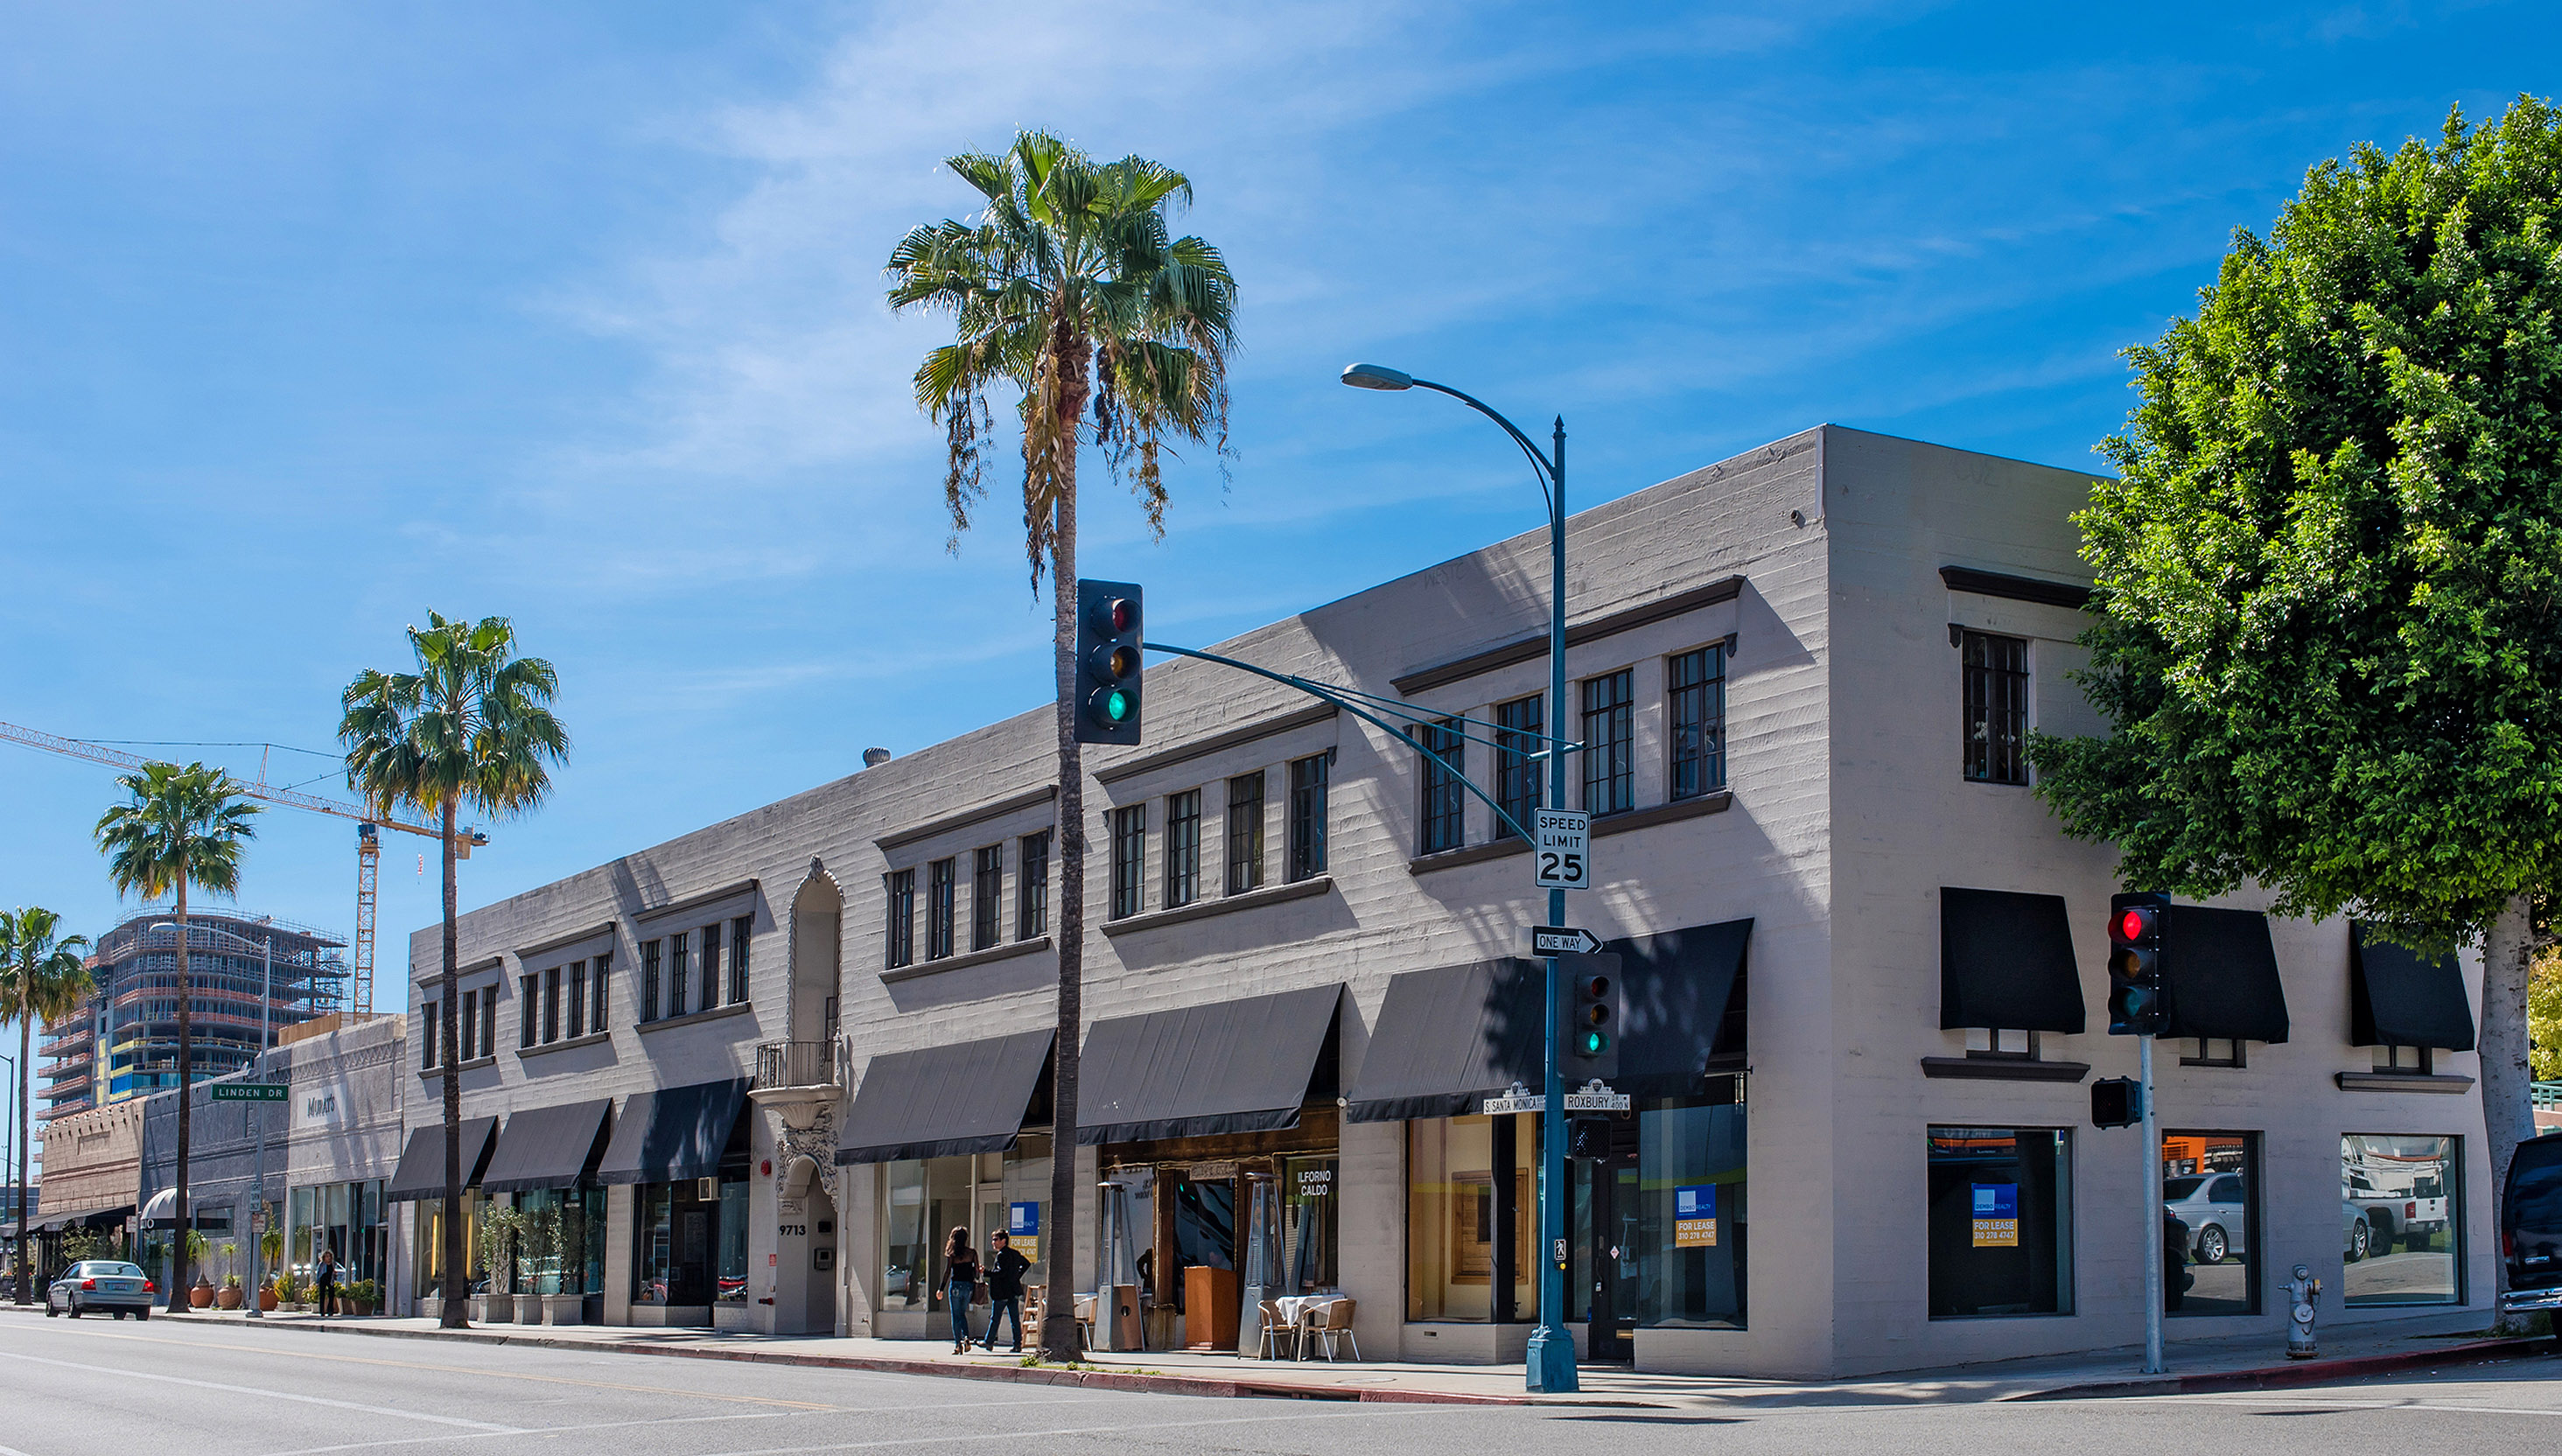 WESTMAC COMMERCIAL BROKERAGE COMPANY ARRANGES A $15 MILLION TRANSACTION IN BEVERLY HILLS GOLDEN TRIANGLE